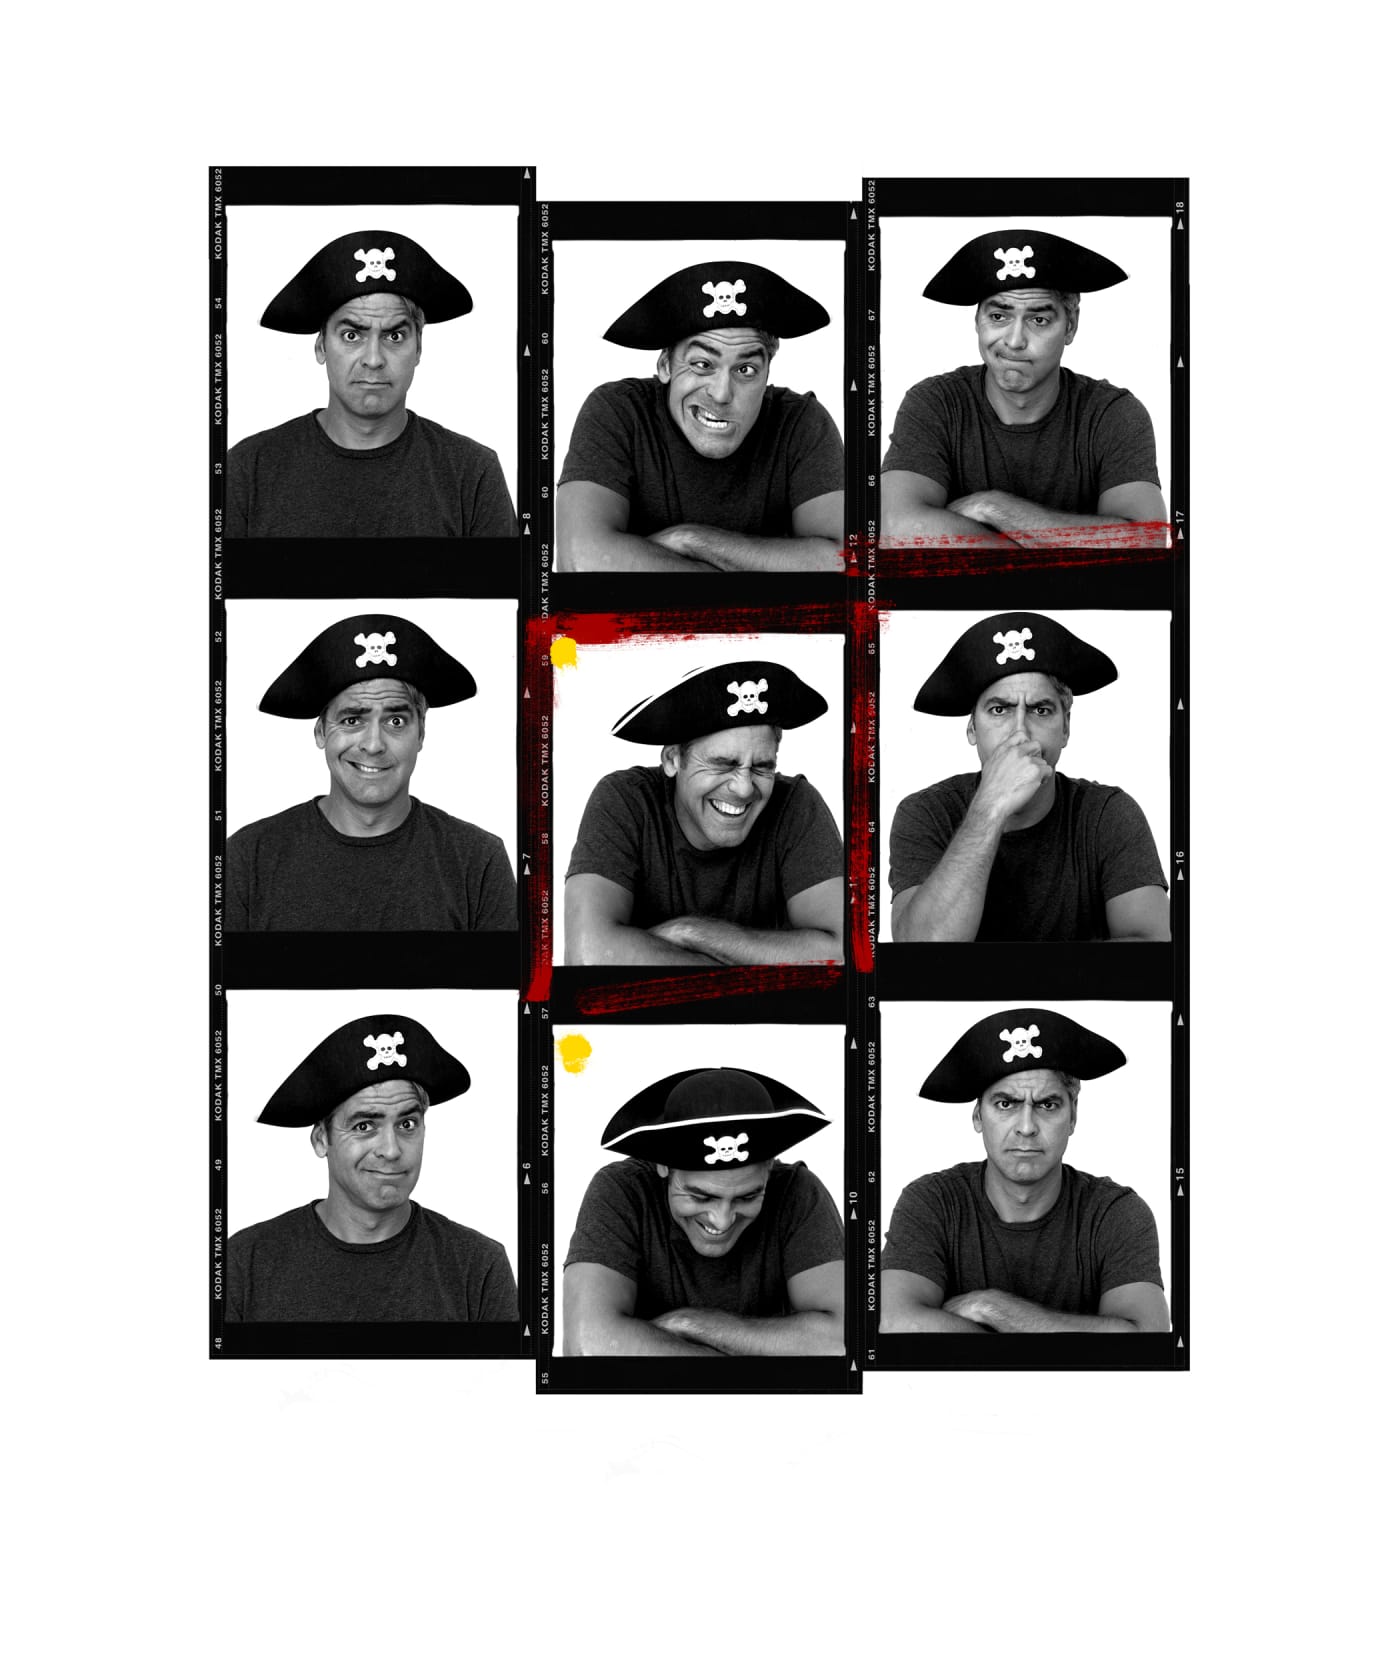 Andy Gotts George Clooney Contact Sheet Fine Art Giclée Archival Print